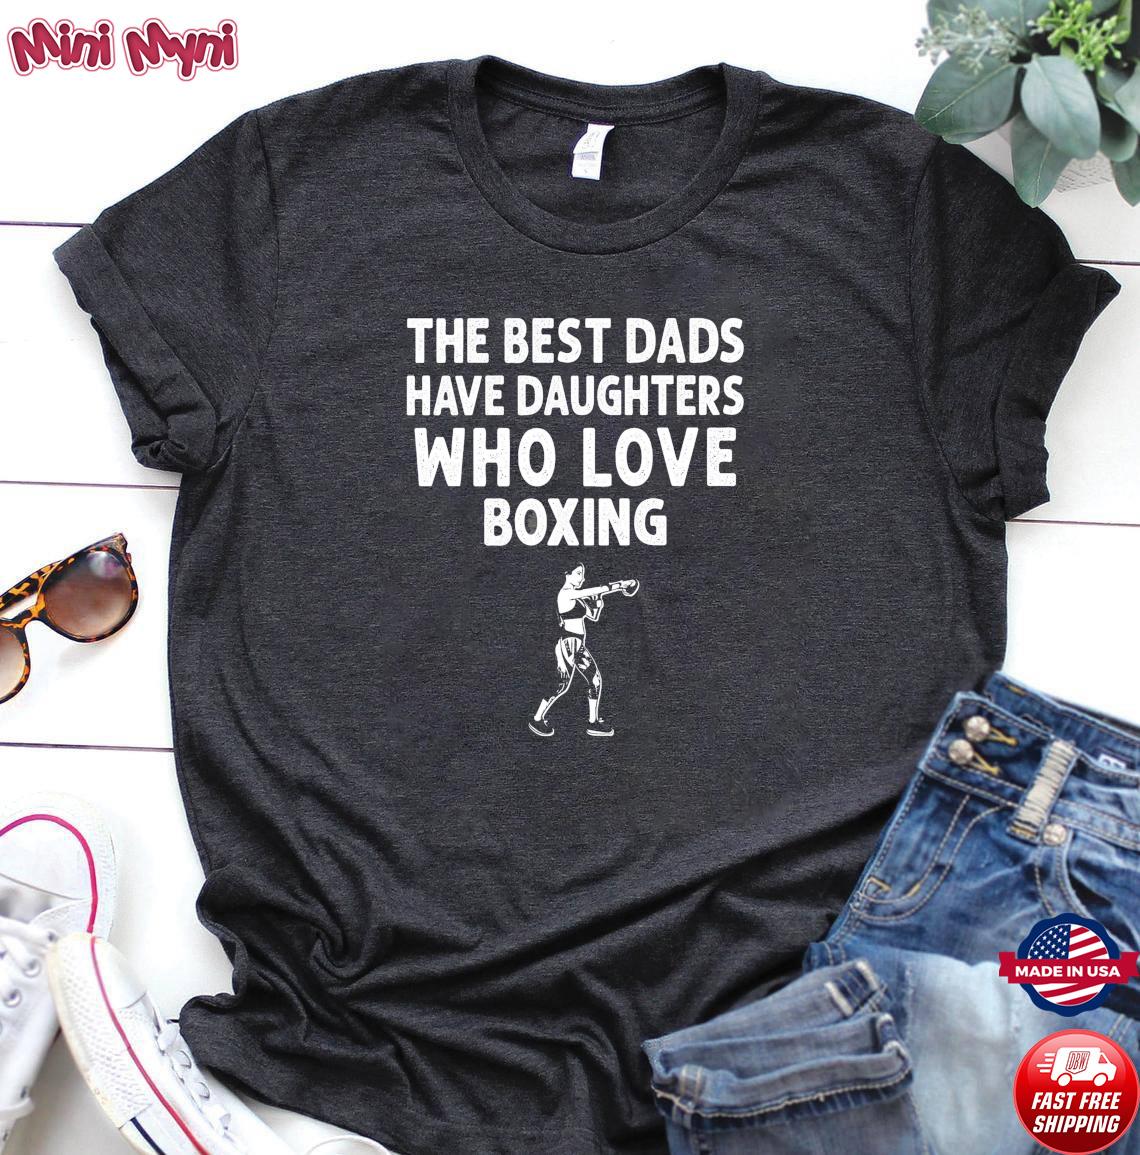 The Best Dads Have Daughters Who Love Boxing T Shirt Hoodie Sweater